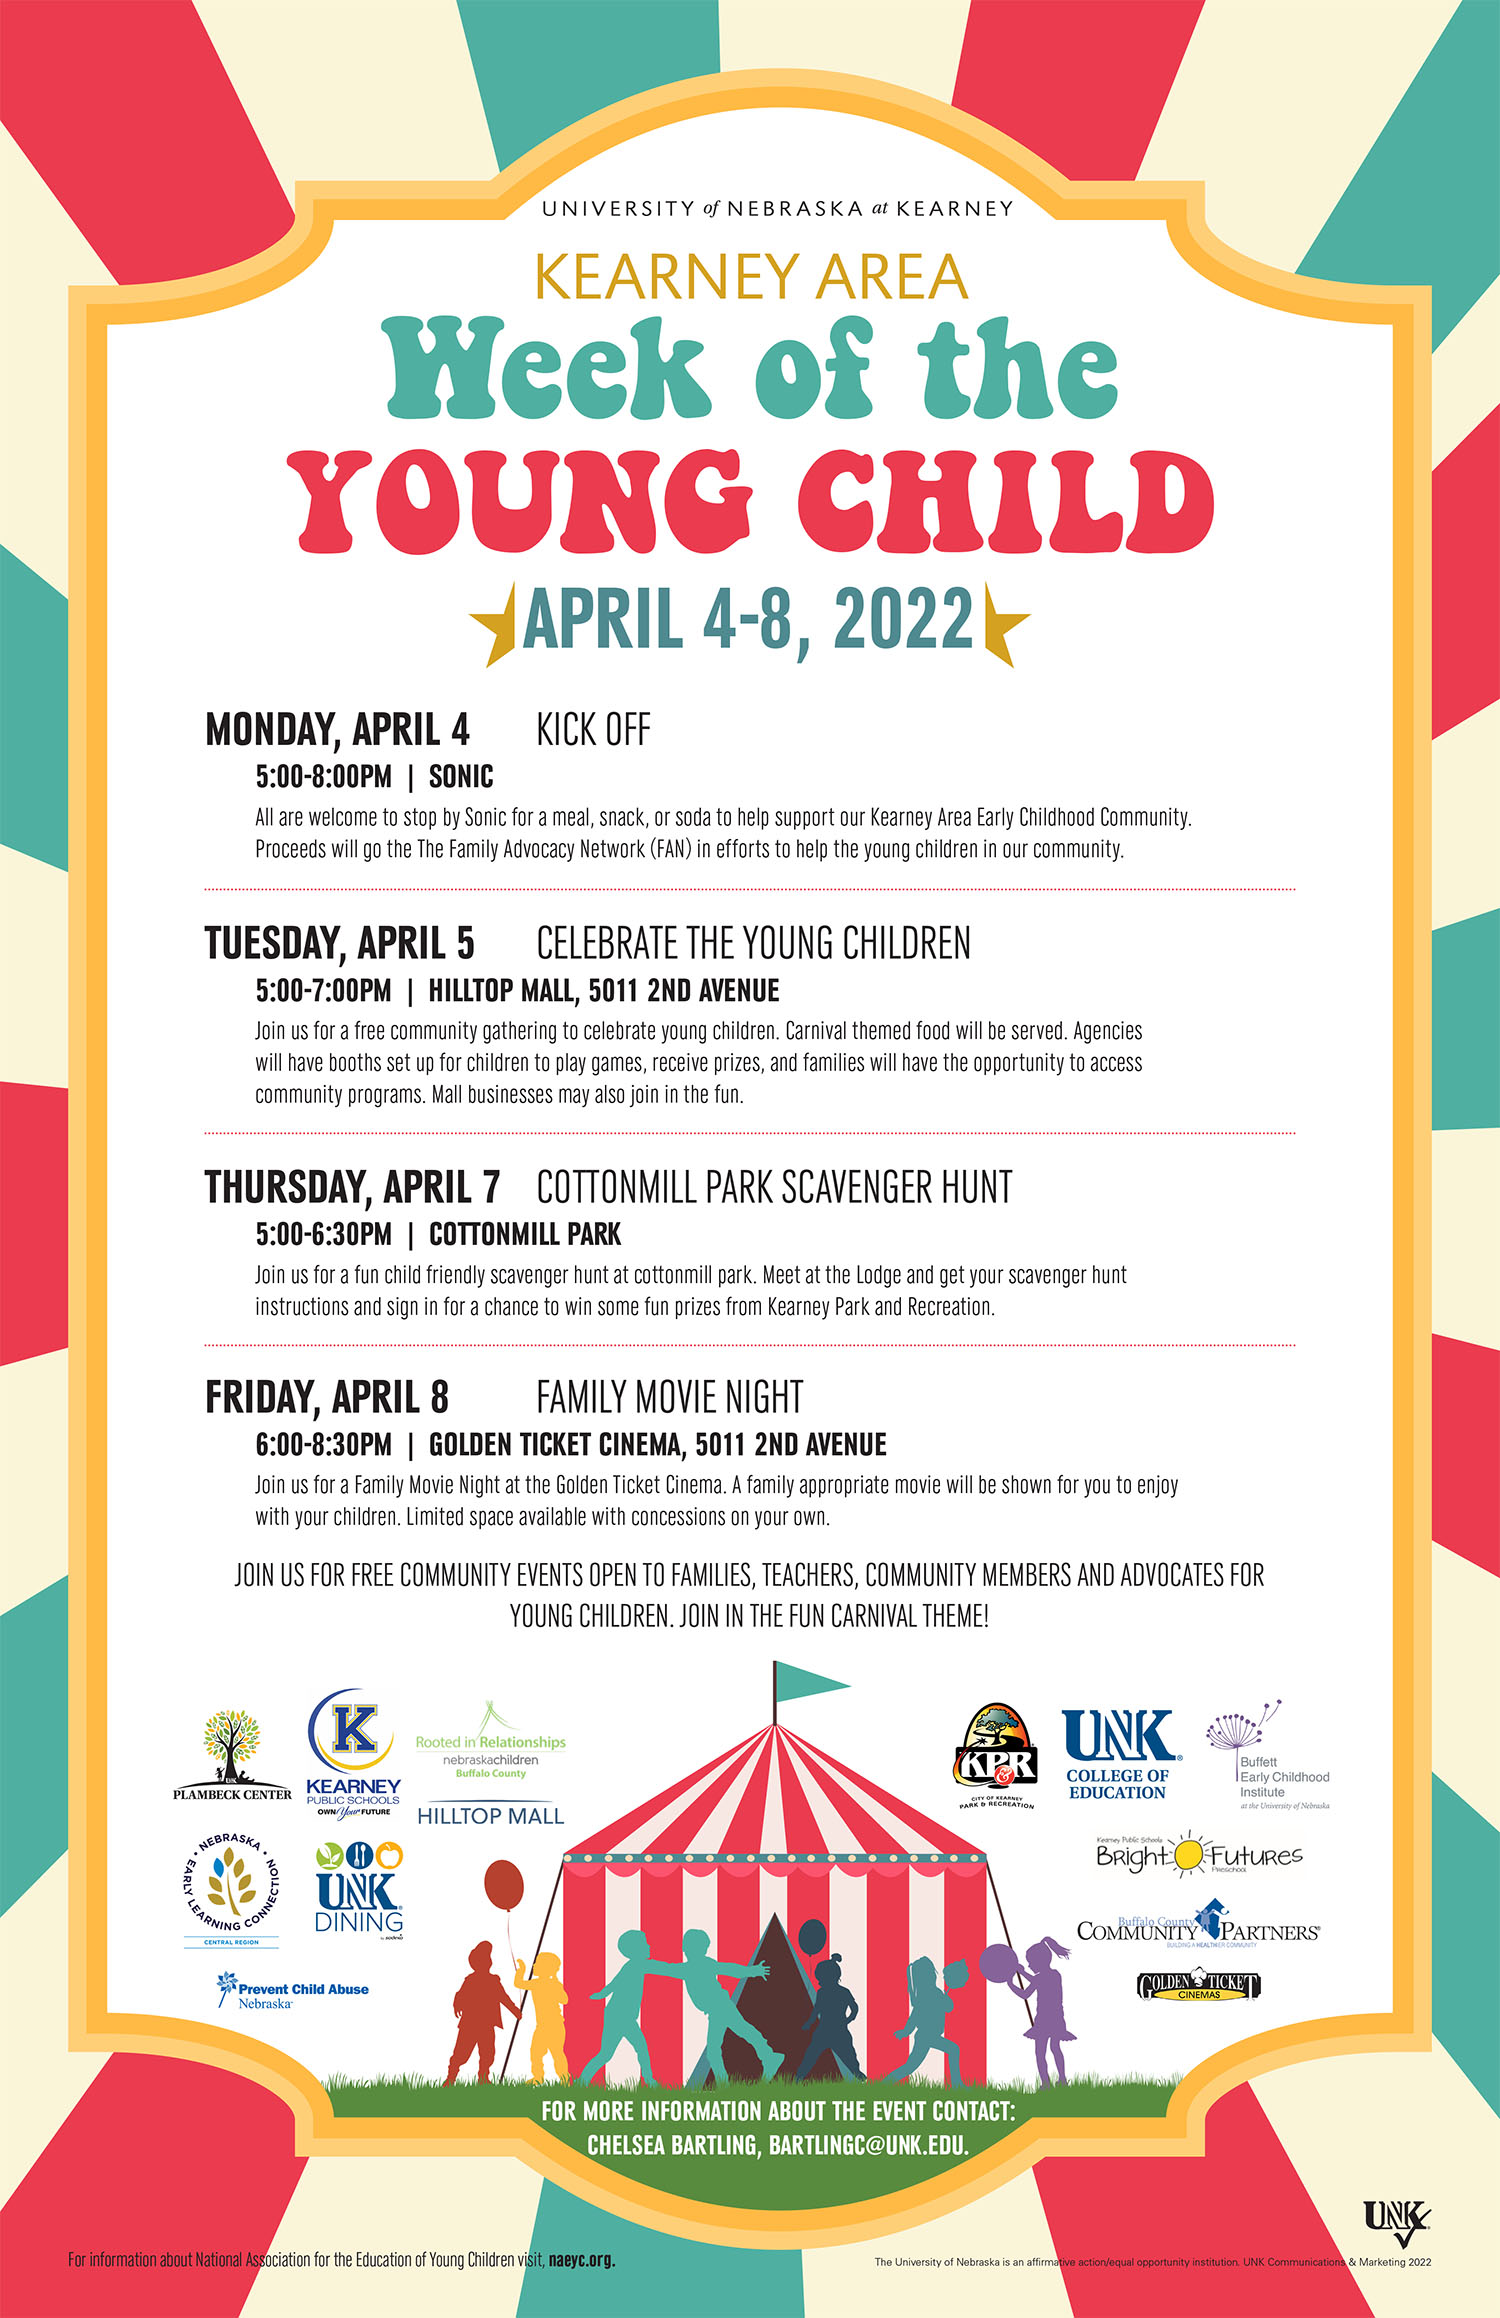 Kearney Area Week of the Young Child events scheduled for April 48